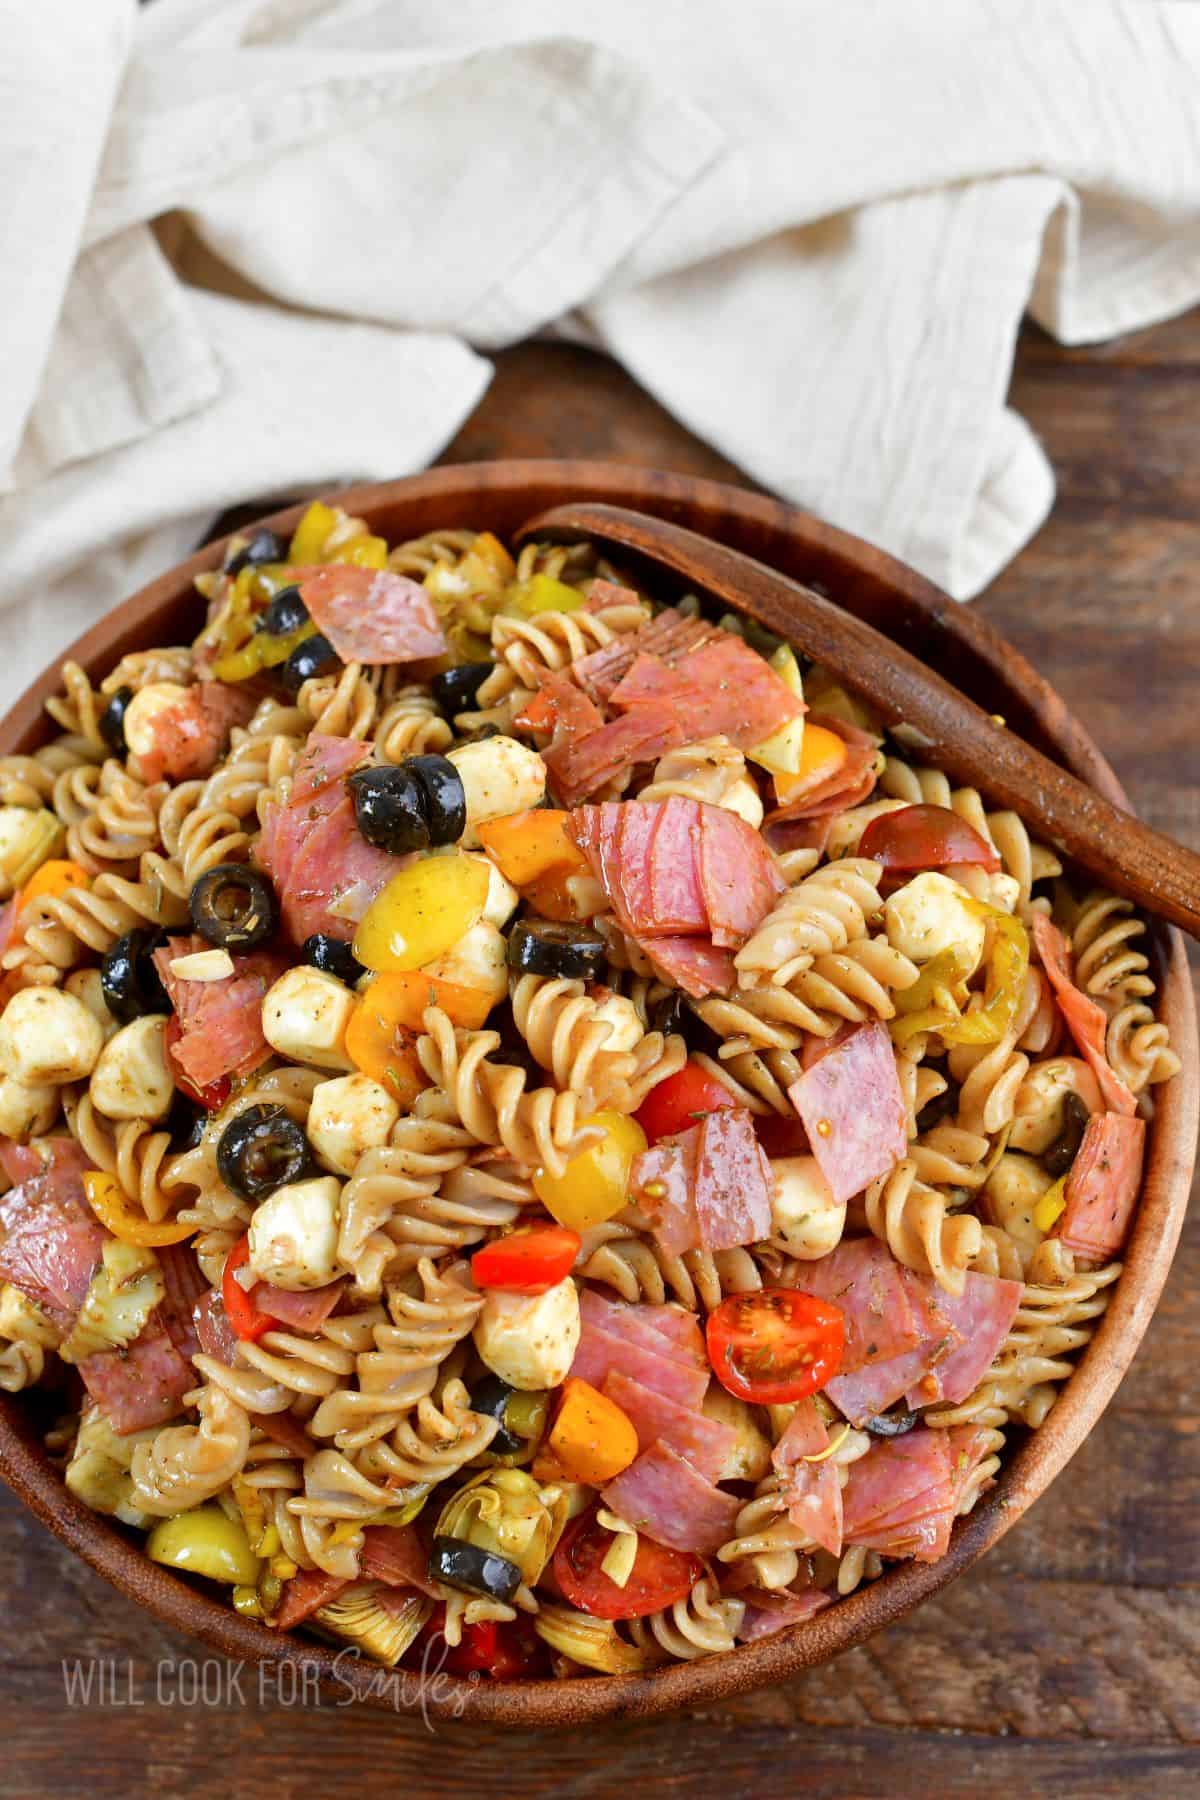 Italian antipasto pasta salad in a wooden bowl with a wooden spoon and a towel.